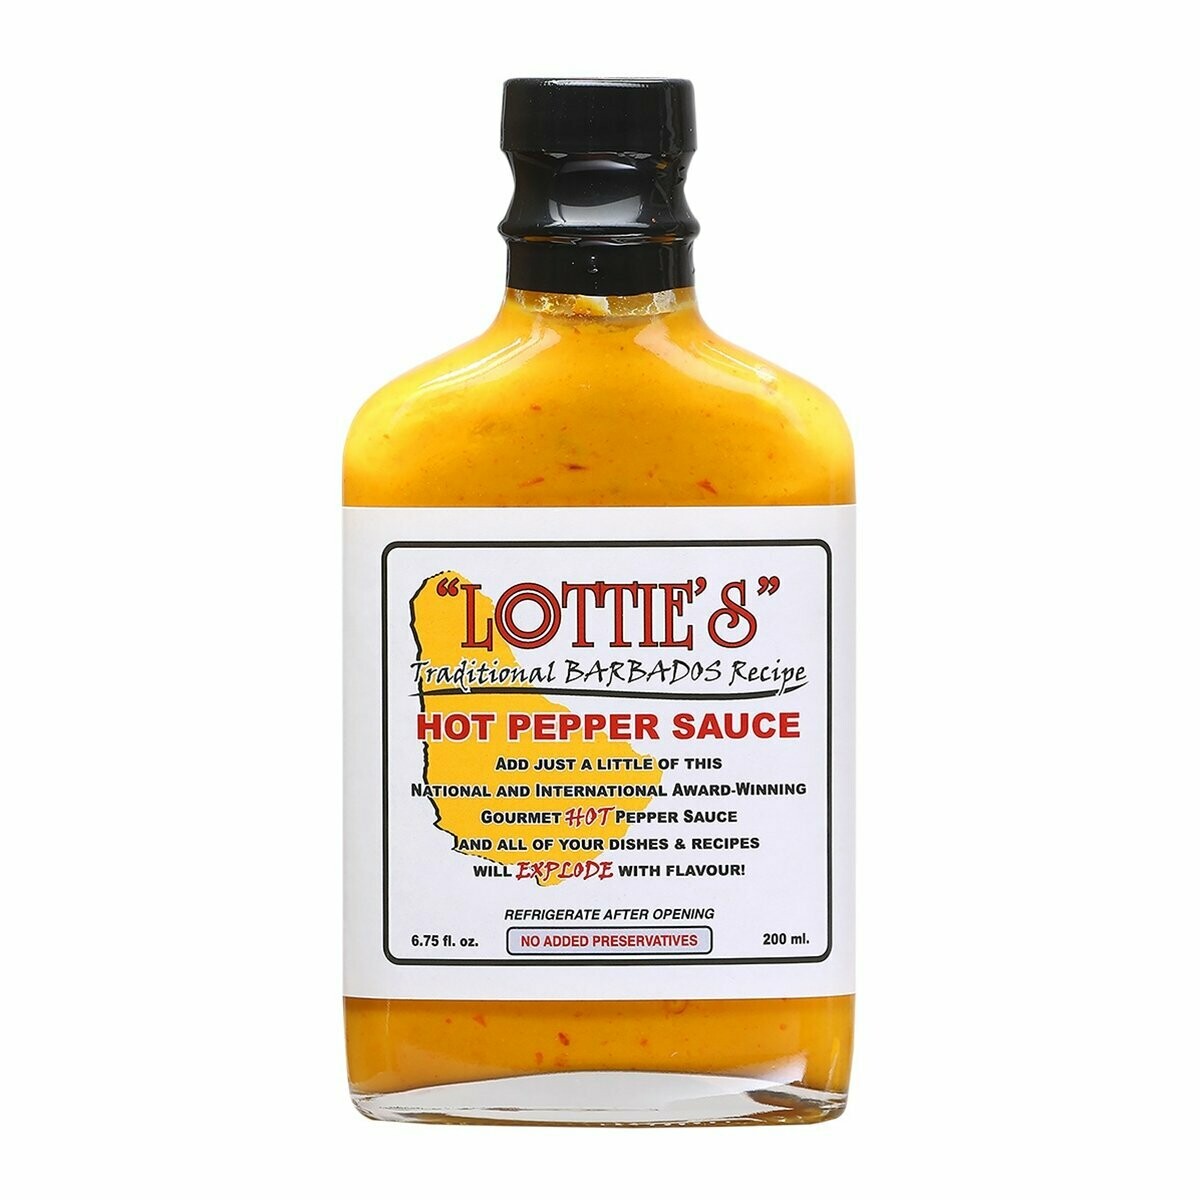 Lottie's Traditional Barbados Yellow Hot Pepper Sauce - 6.75 oz